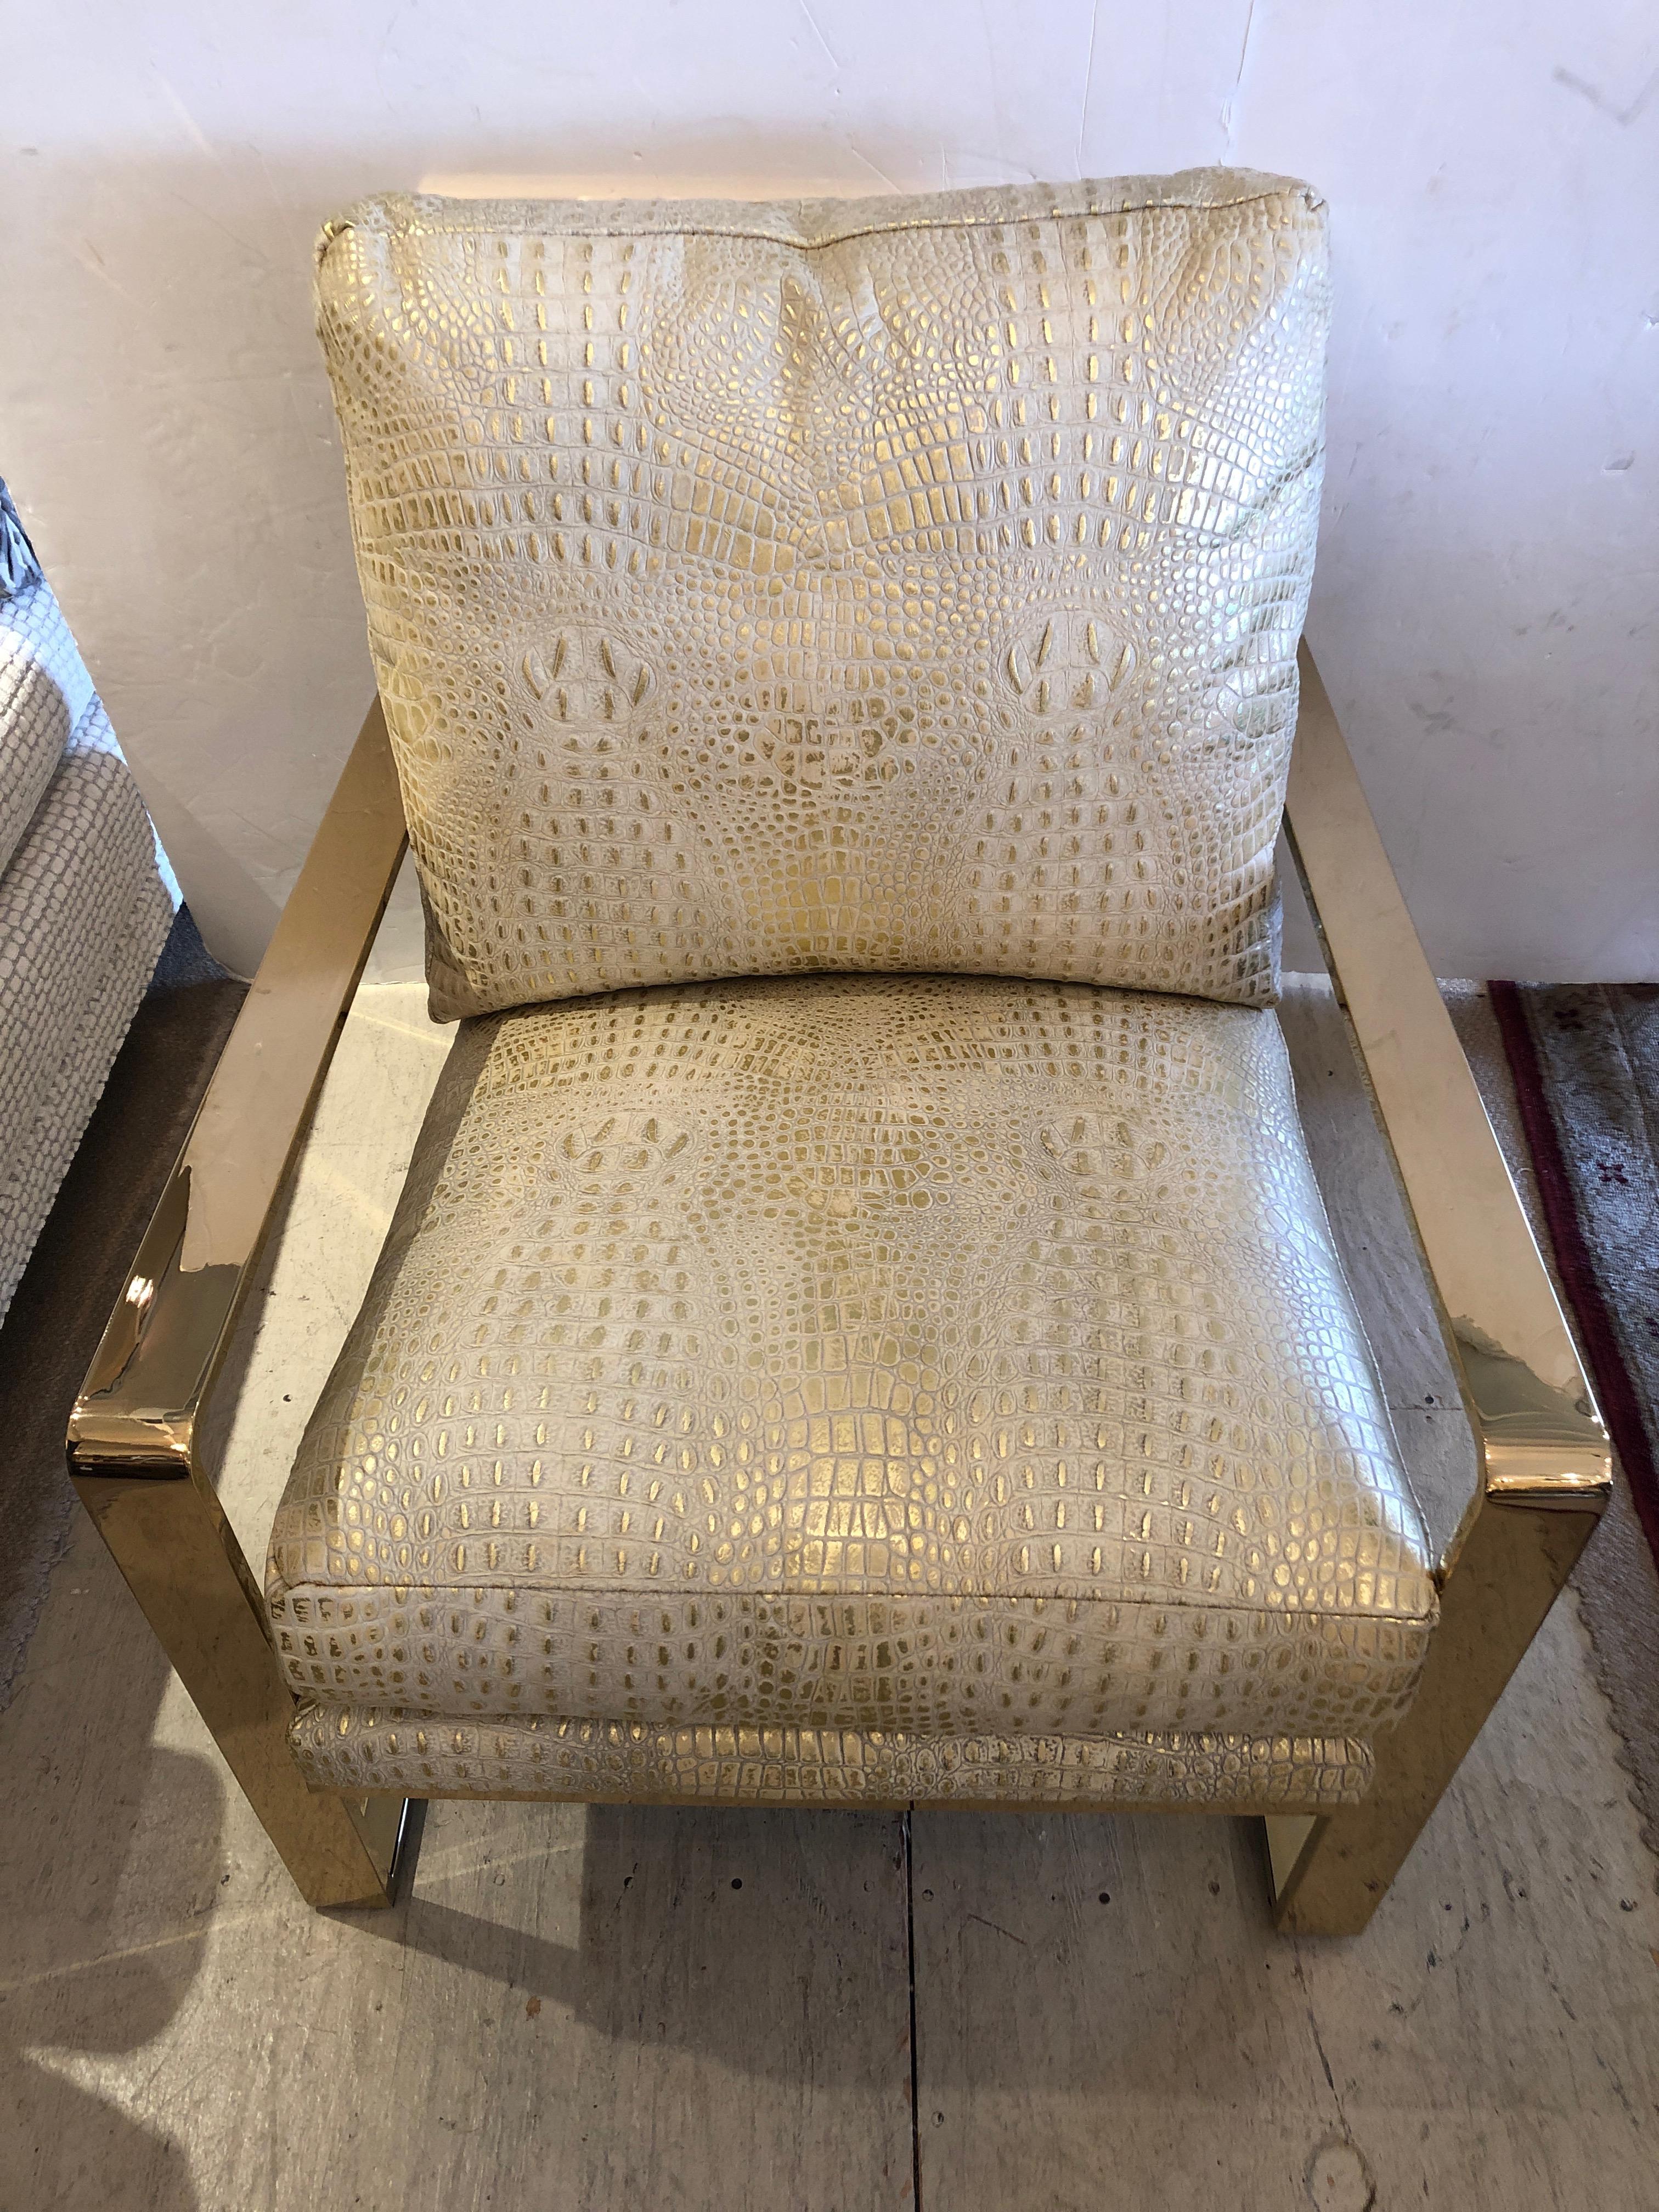 A show stealer glamour chair having chunky brass frame and sensational faux crocodile metallic upholstery that shimmers in cream and gold.
Measures: Arm height 22.5
Seat depth 18.5.